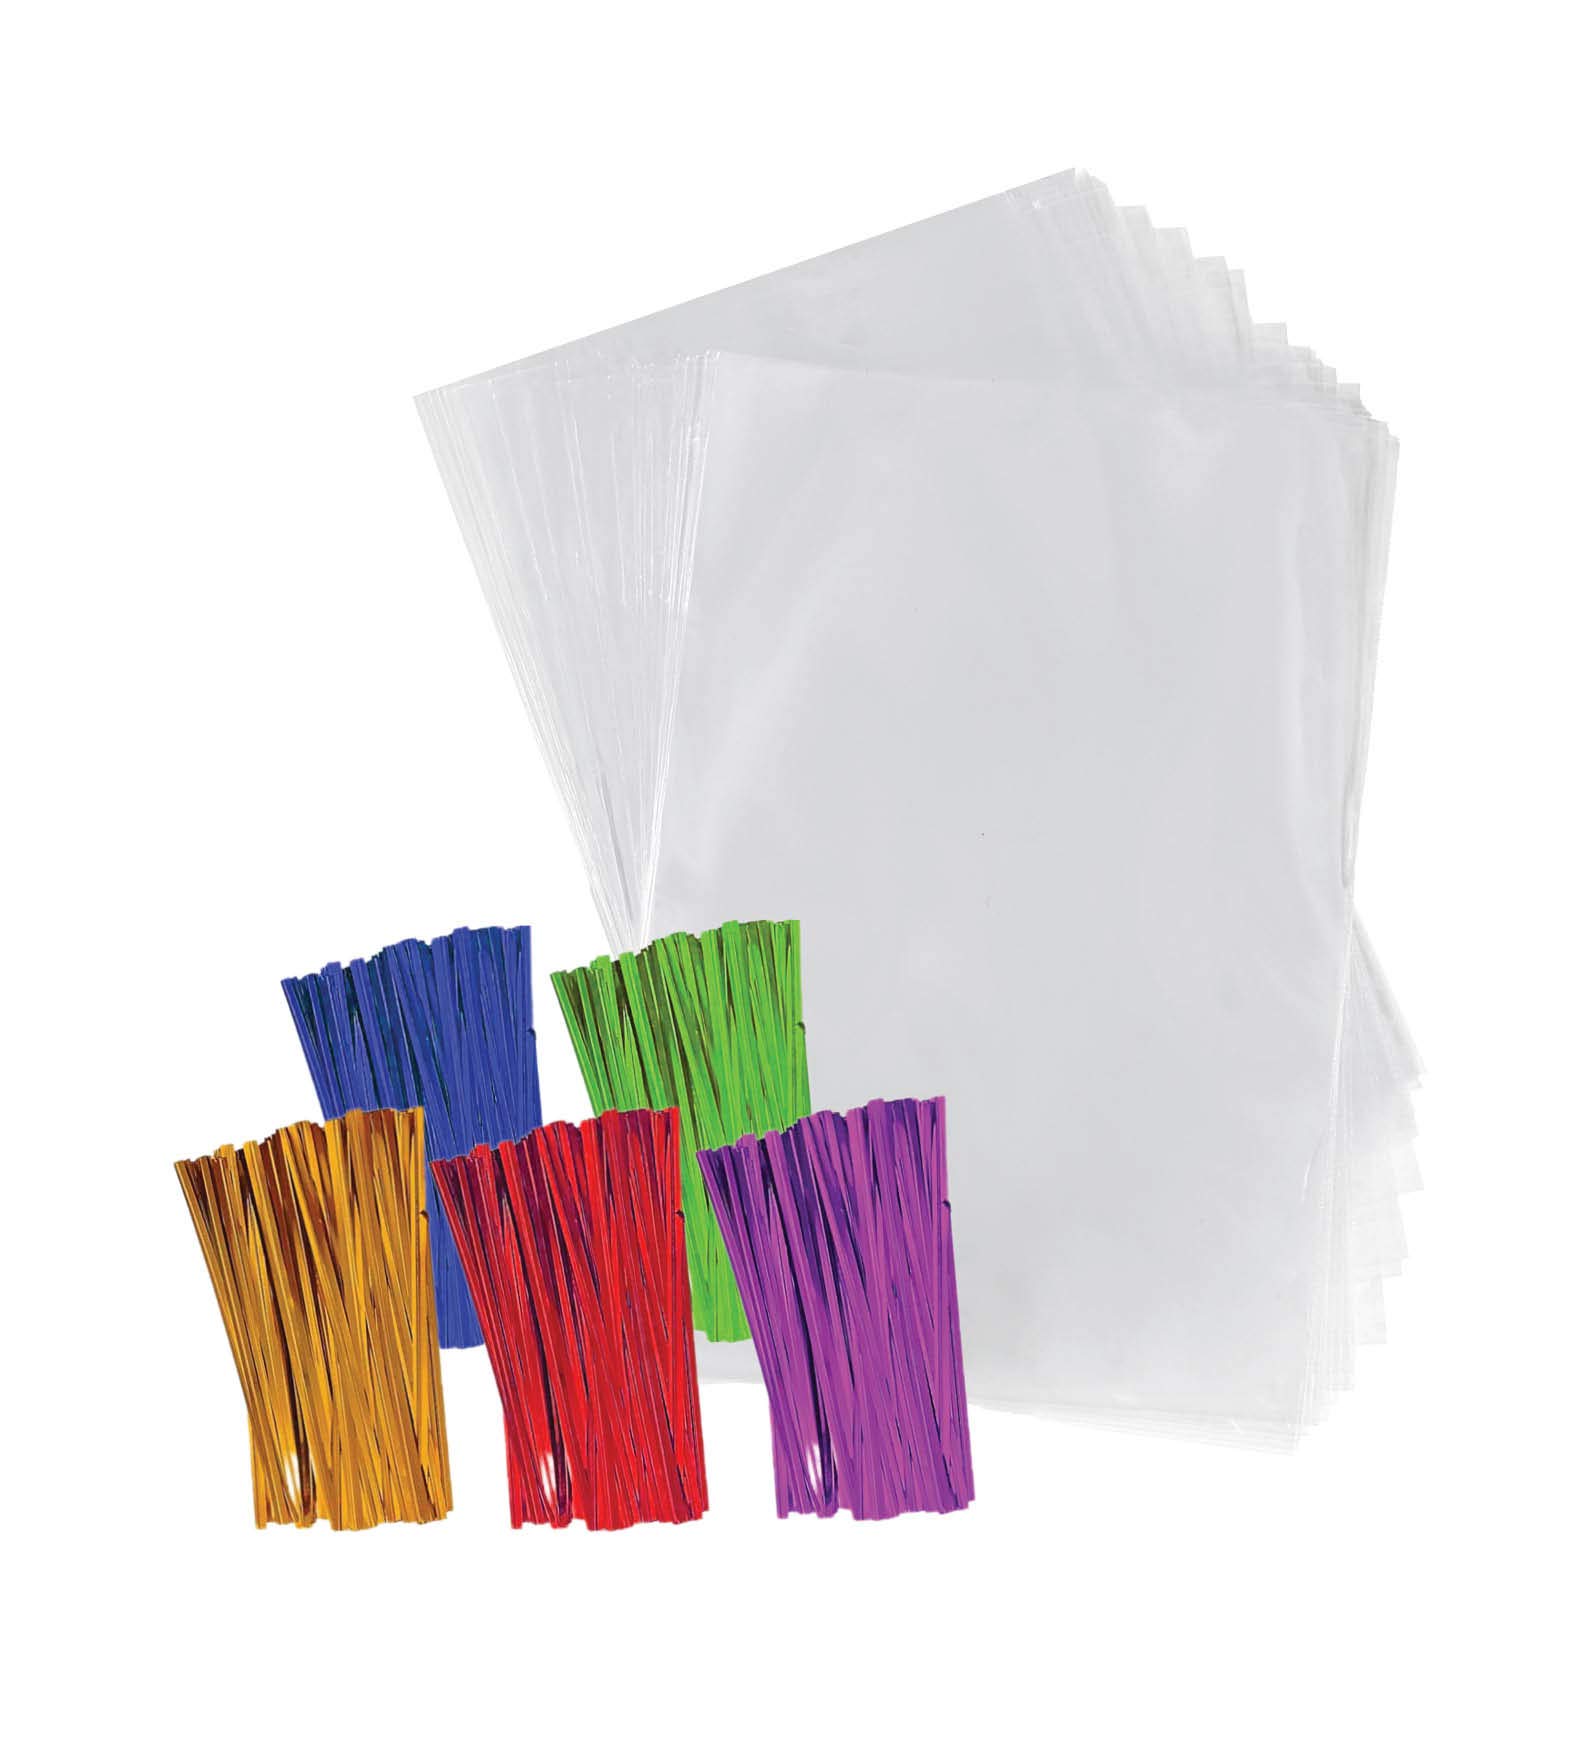 Clear Plastic Cellophane Bags with 4 Colored Twist Ties for Gifts Party  Favors (4x6, 100 Pack) 4x6 Inch (Pack of 100) 100 Pack